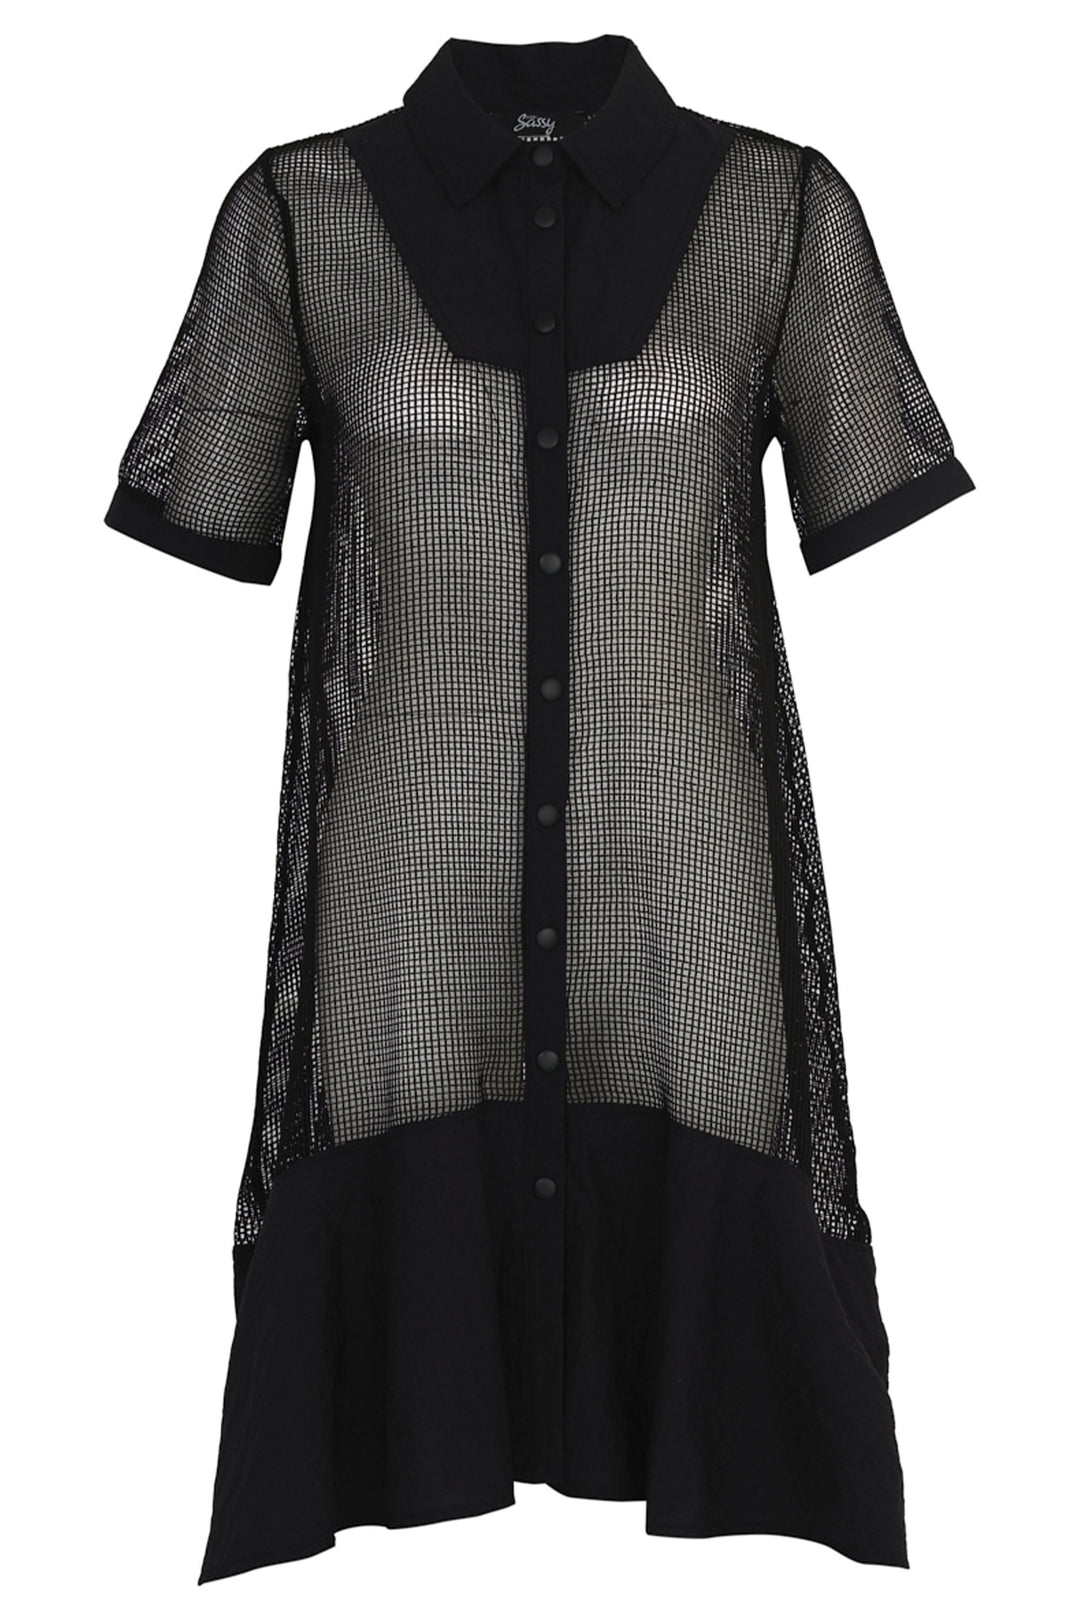 Ever Sassy Summer 2024 The contrast neckline, hem and cuffs add a trendy touch to the long shirt style, making it suitable as a dress, long shirt, or cover-up.